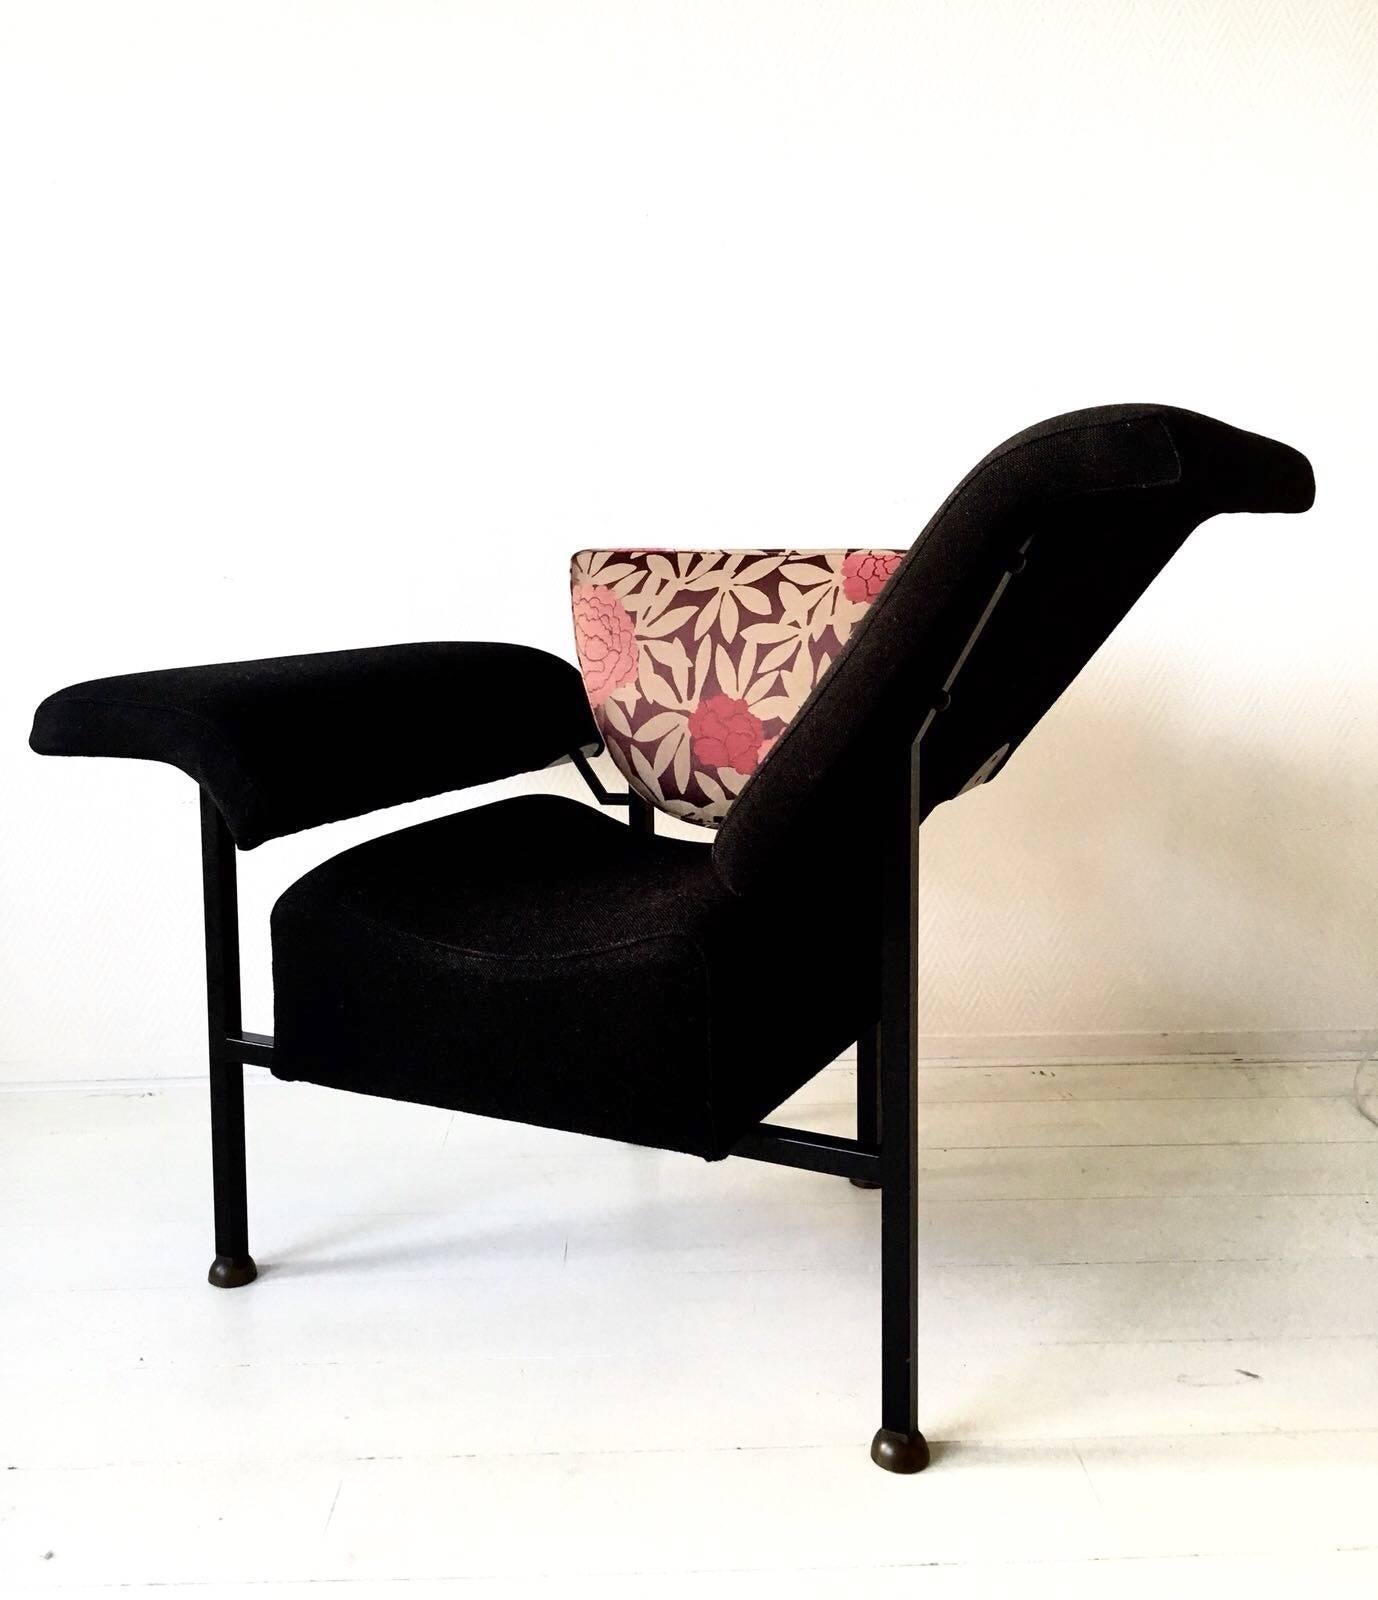 Wonderful Dutch design which name and form refer to a Tulip. Into the chair, people can sit or lie down comfortably. A very modern and minimalistic piece which will draw the attention immediately.
The chair remains in a sturdy condition but shows